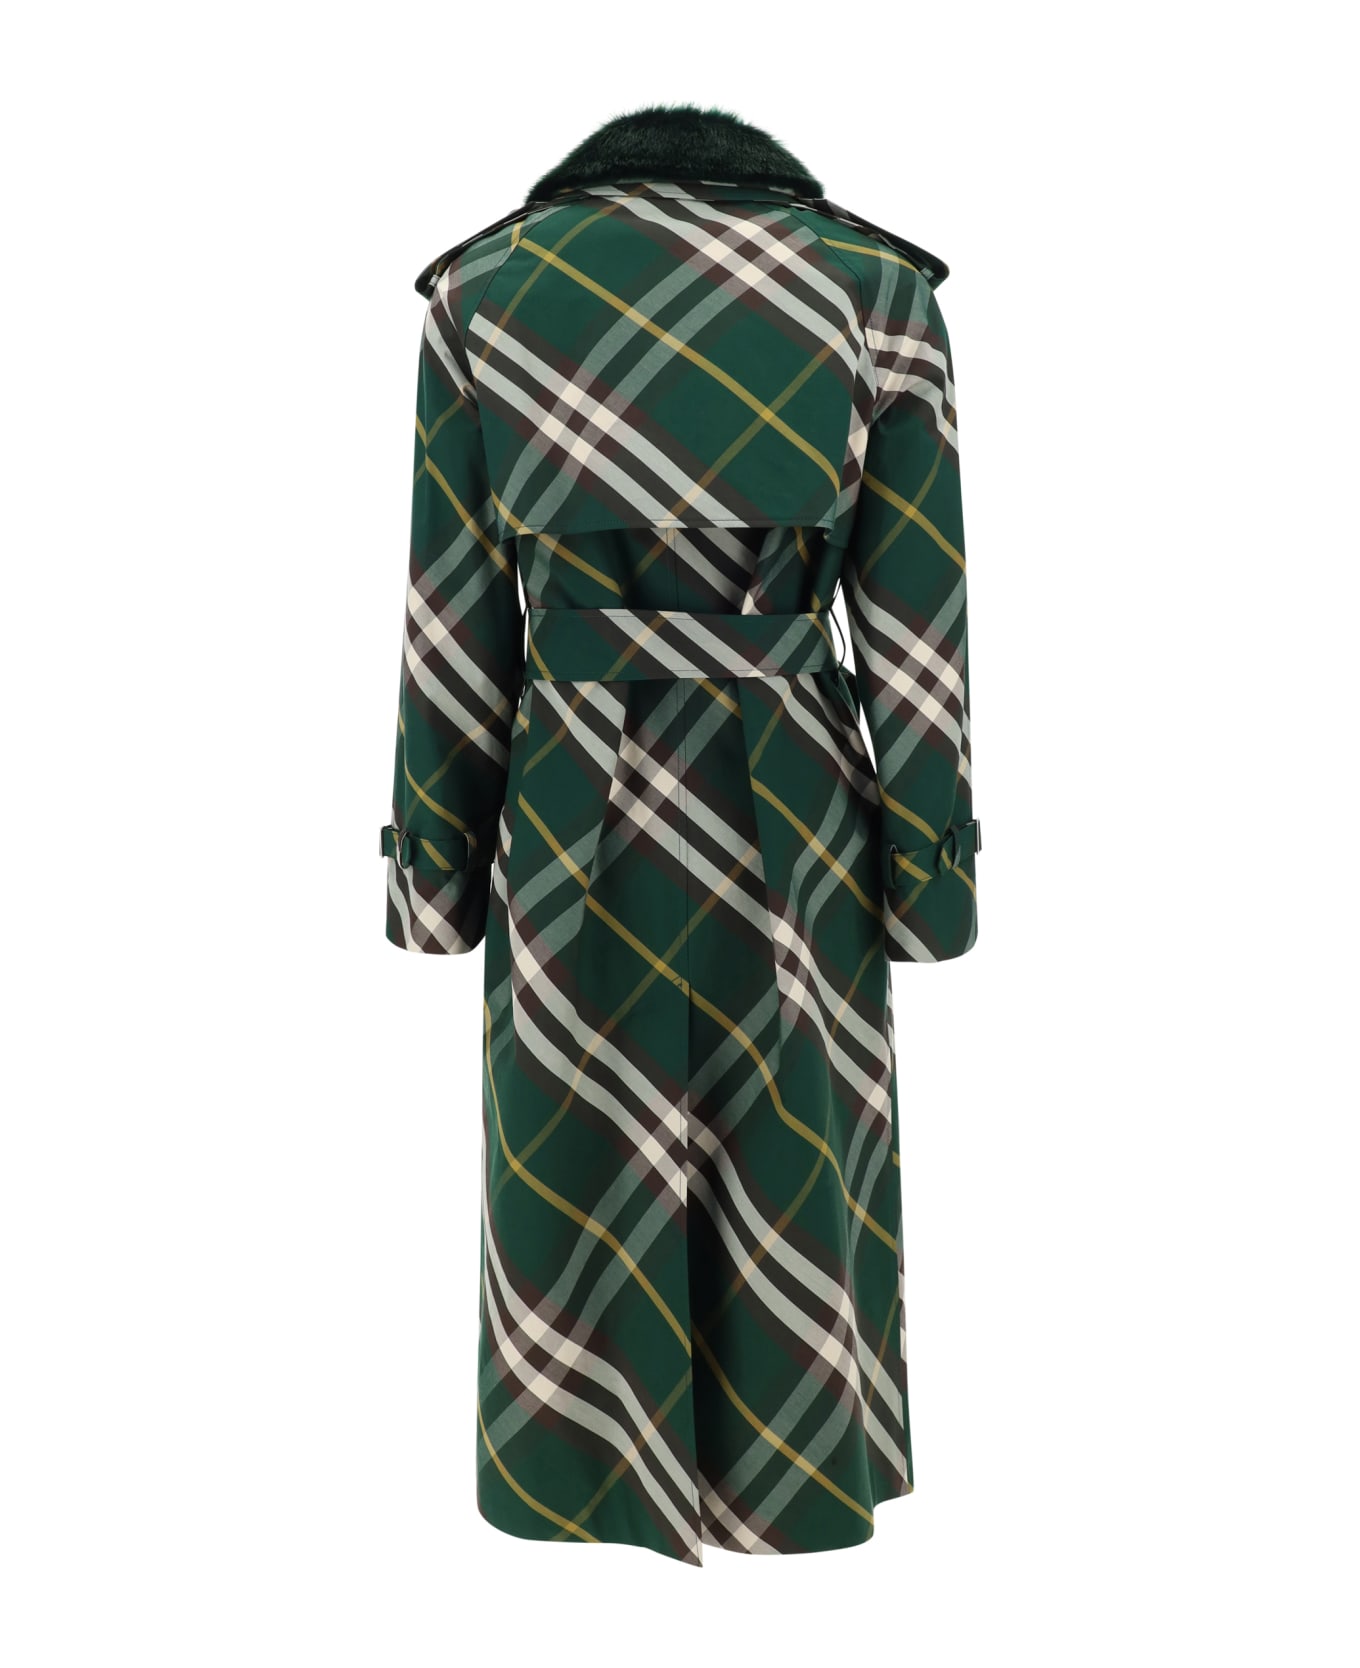 Burberry Trench Coat - Ivy Ip Check